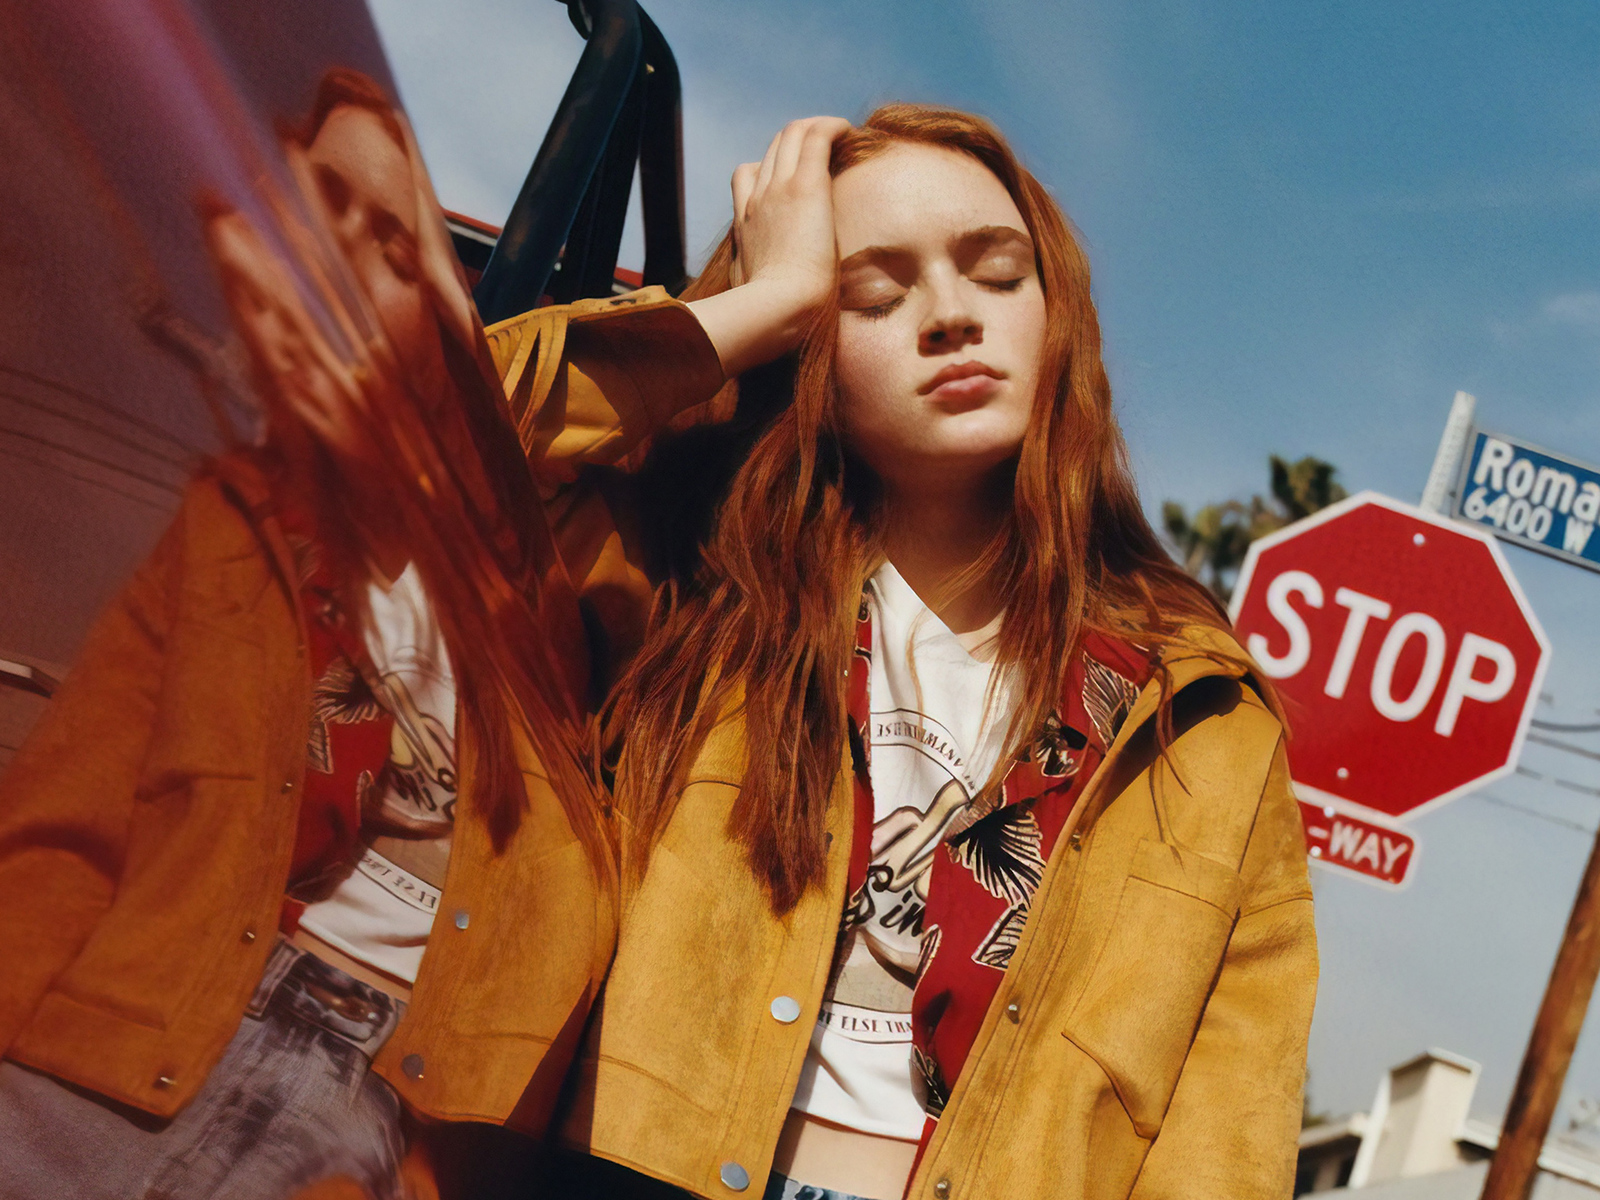 Sadie Sink Pull And Bear 2019 1600x1200 Resolution HD 4k Wallpaper, Image, Background, Photo and Picture